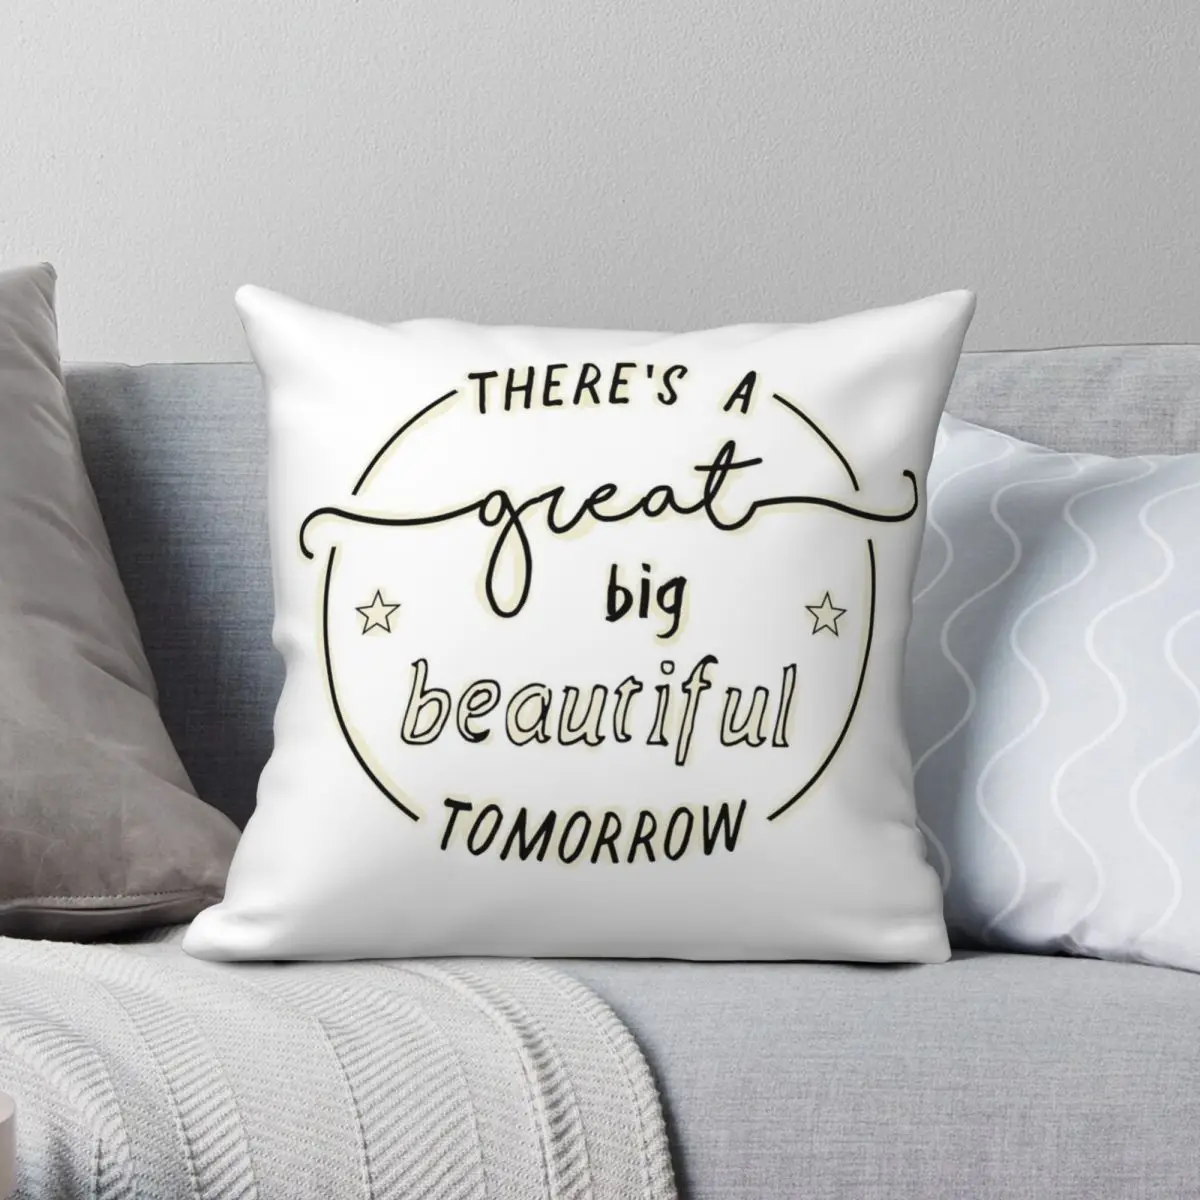 

There's A Great Big Beautiful Tomorrow Pillowcase Polyester Linen Velvet Printed Zip Decor Pillow Case Car Cushion Cover 18"